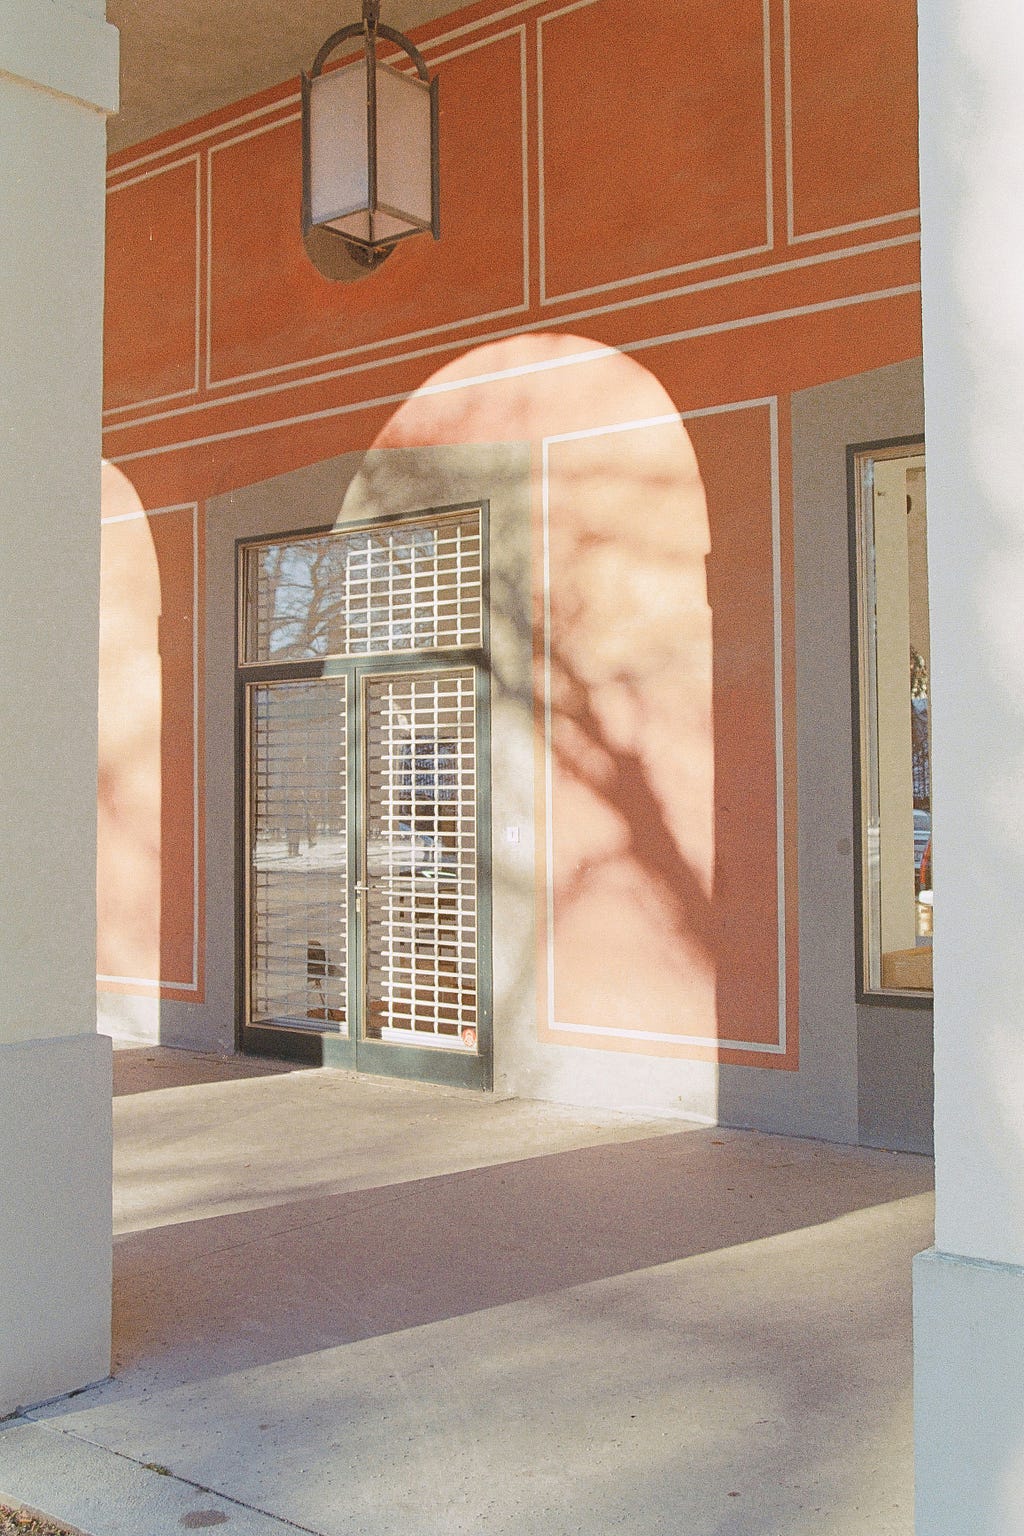 A section of a building’s exterior with warm orange walls and paler orange geometric trim, featuring a hanging lantern, grid-pane windows, and door, with the shadow of a tree cast upon the wall.